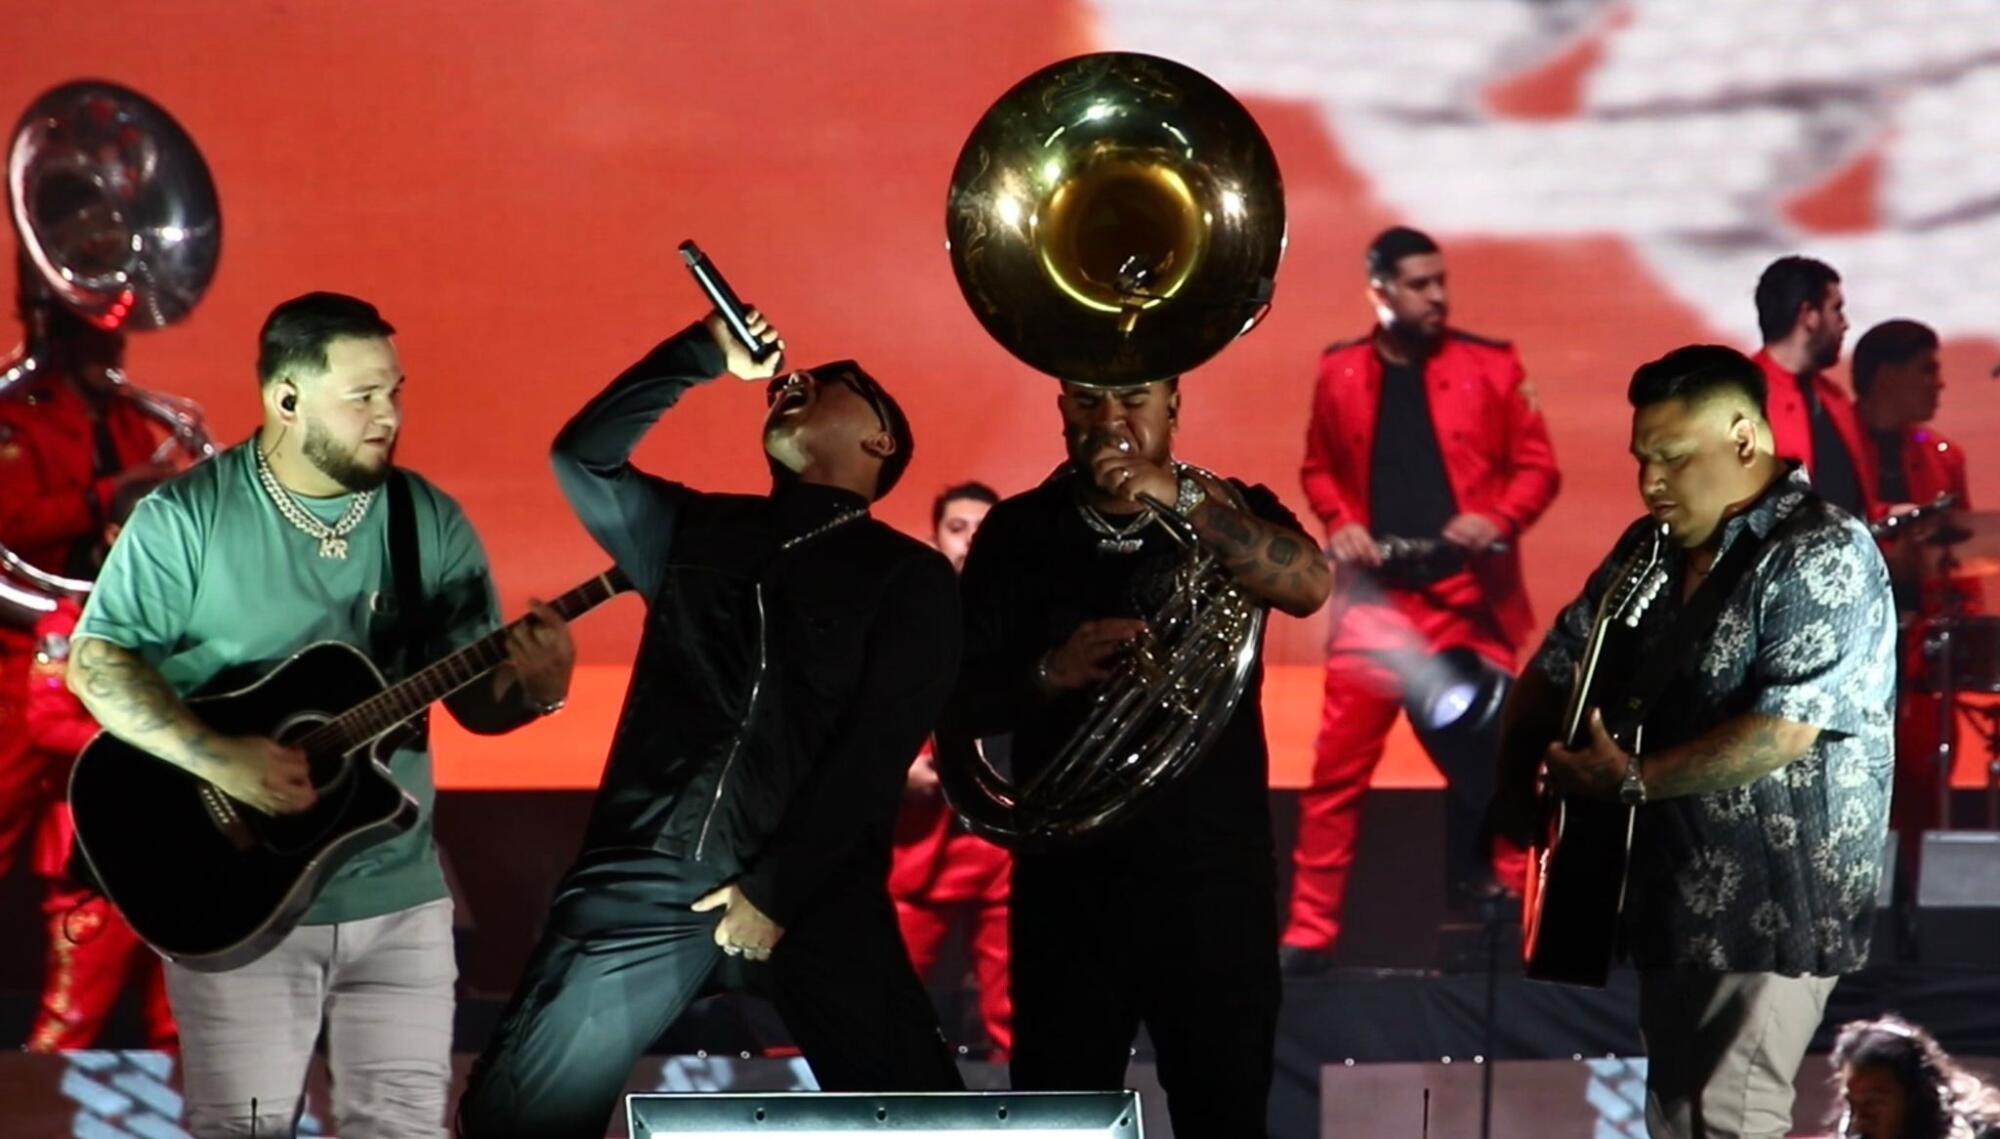 Band performa on stage at BMO Stadium in Los Angeles